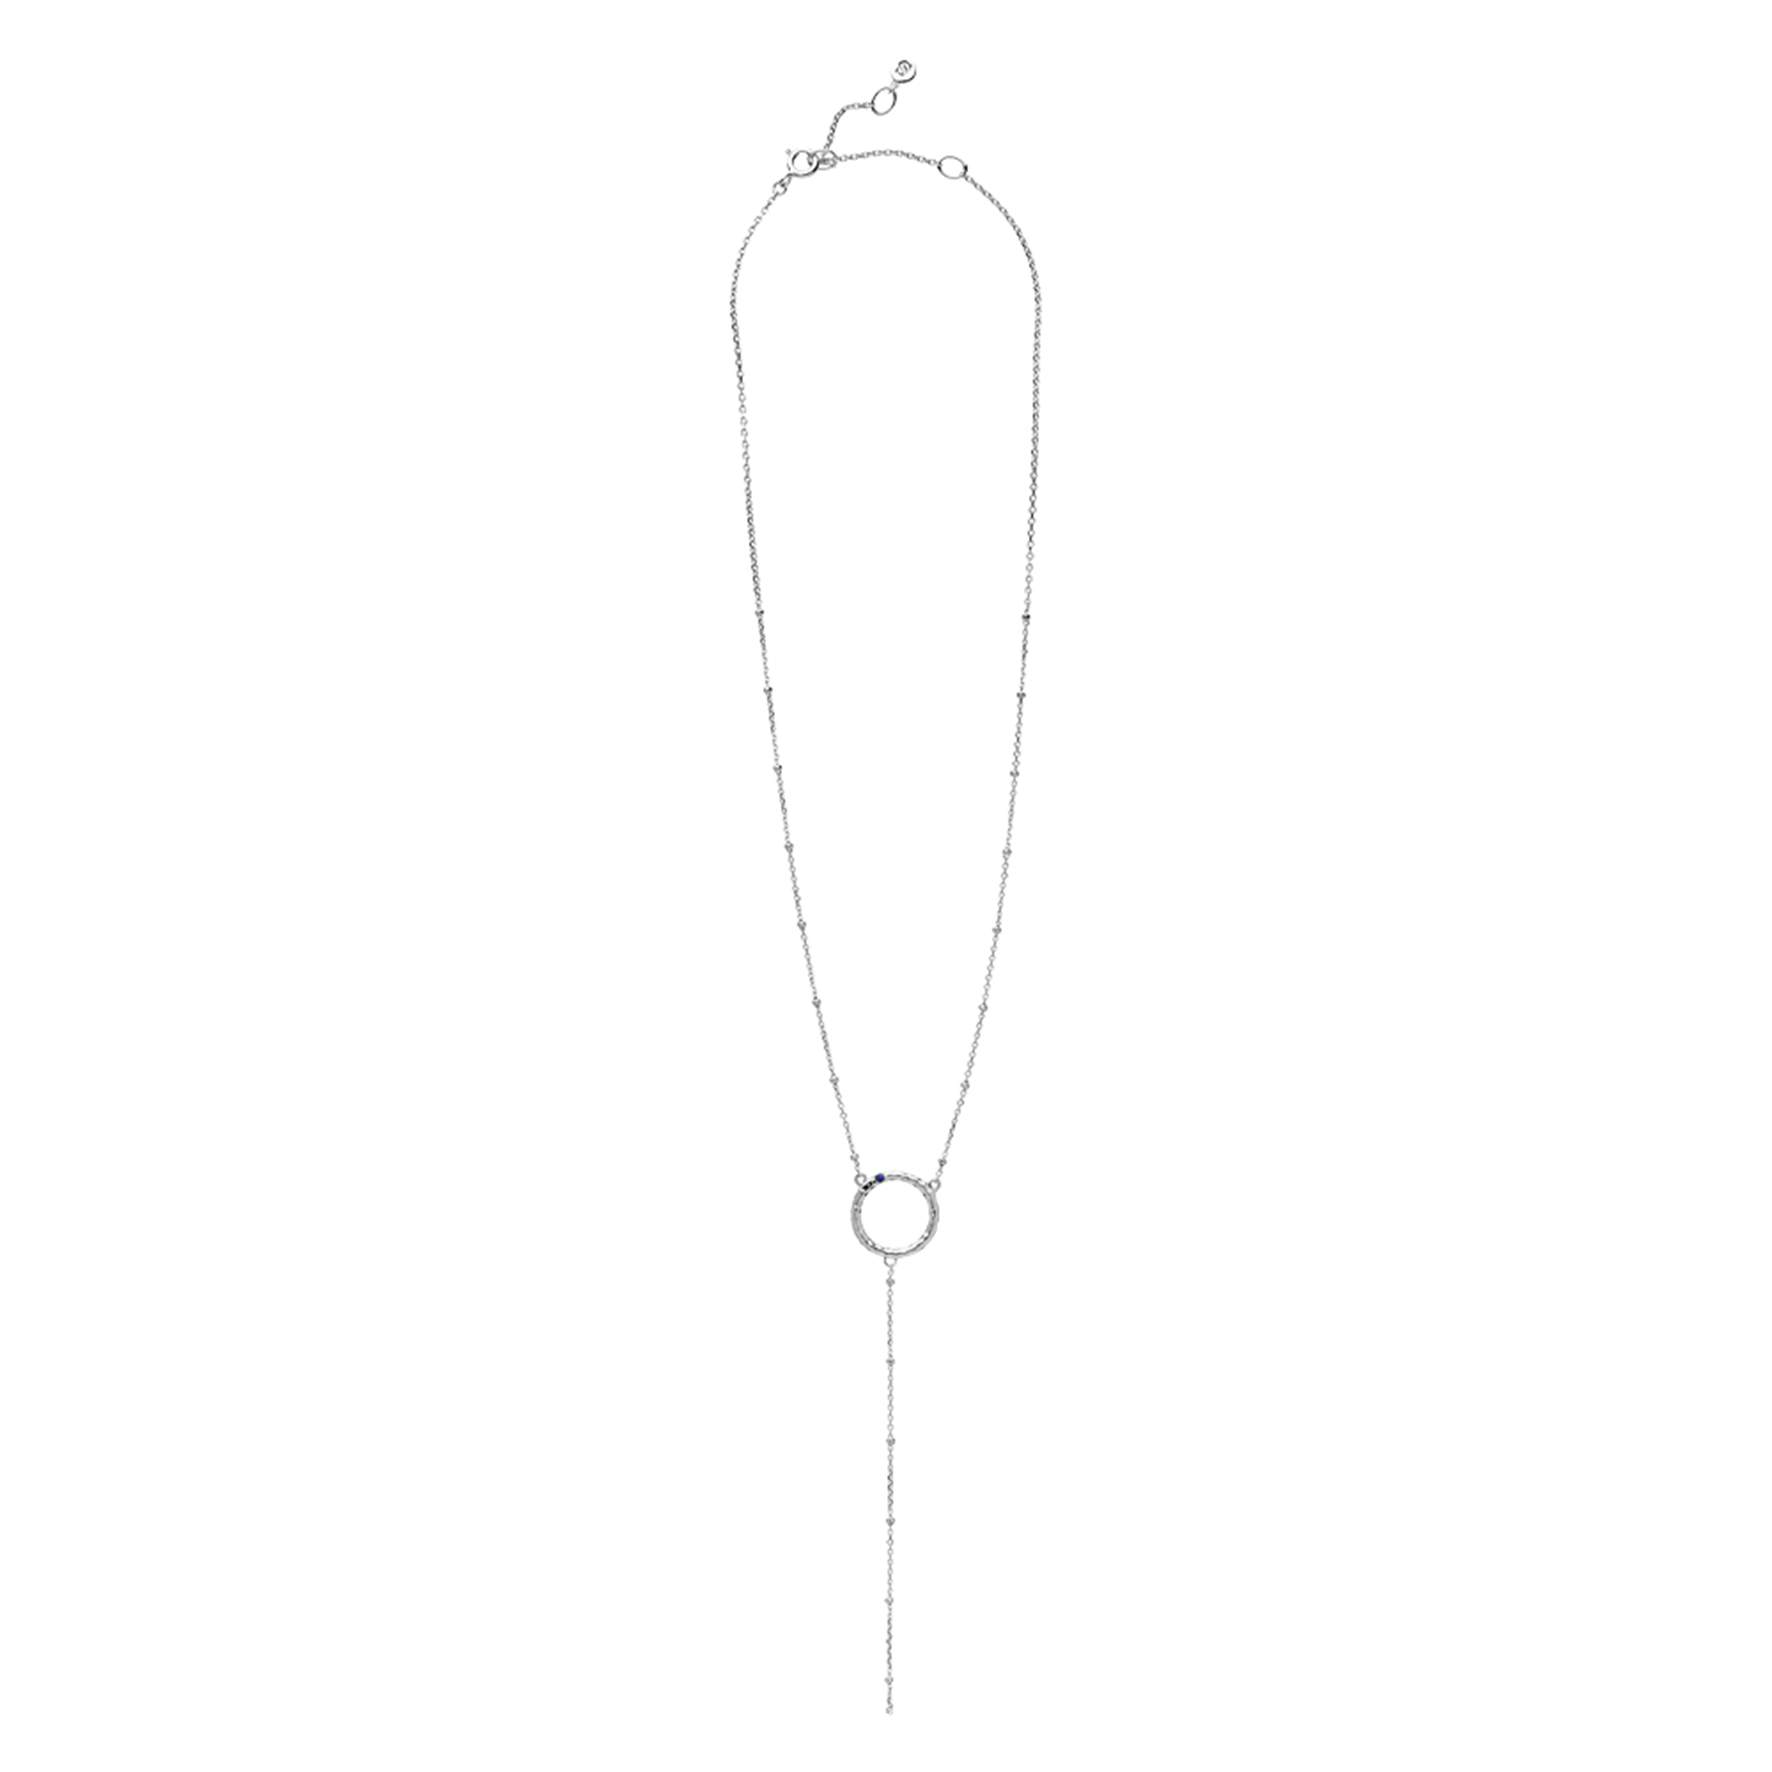 Anabel By Sistie Necklace from Sistie in Silver Sterling 925